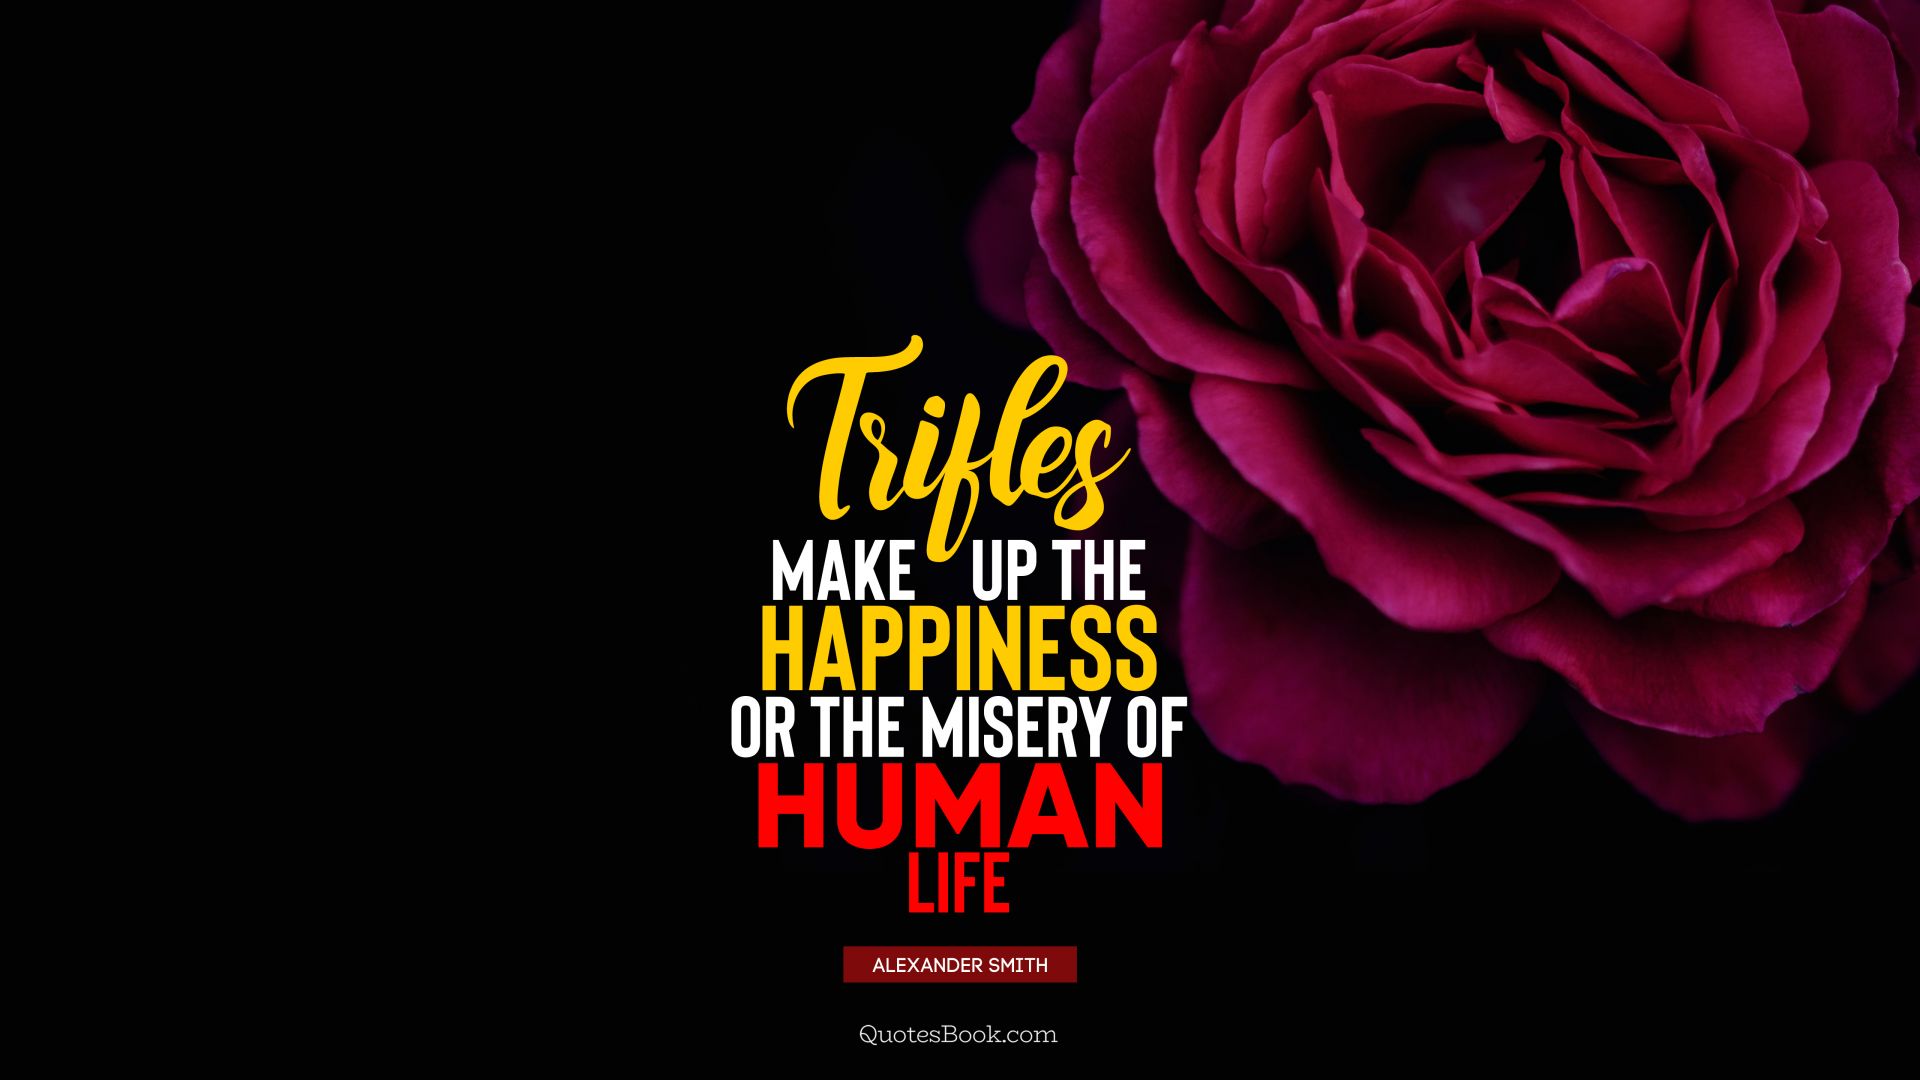 Trifles make up the happiness or the misery of human life. - Quote by Alexander Smith